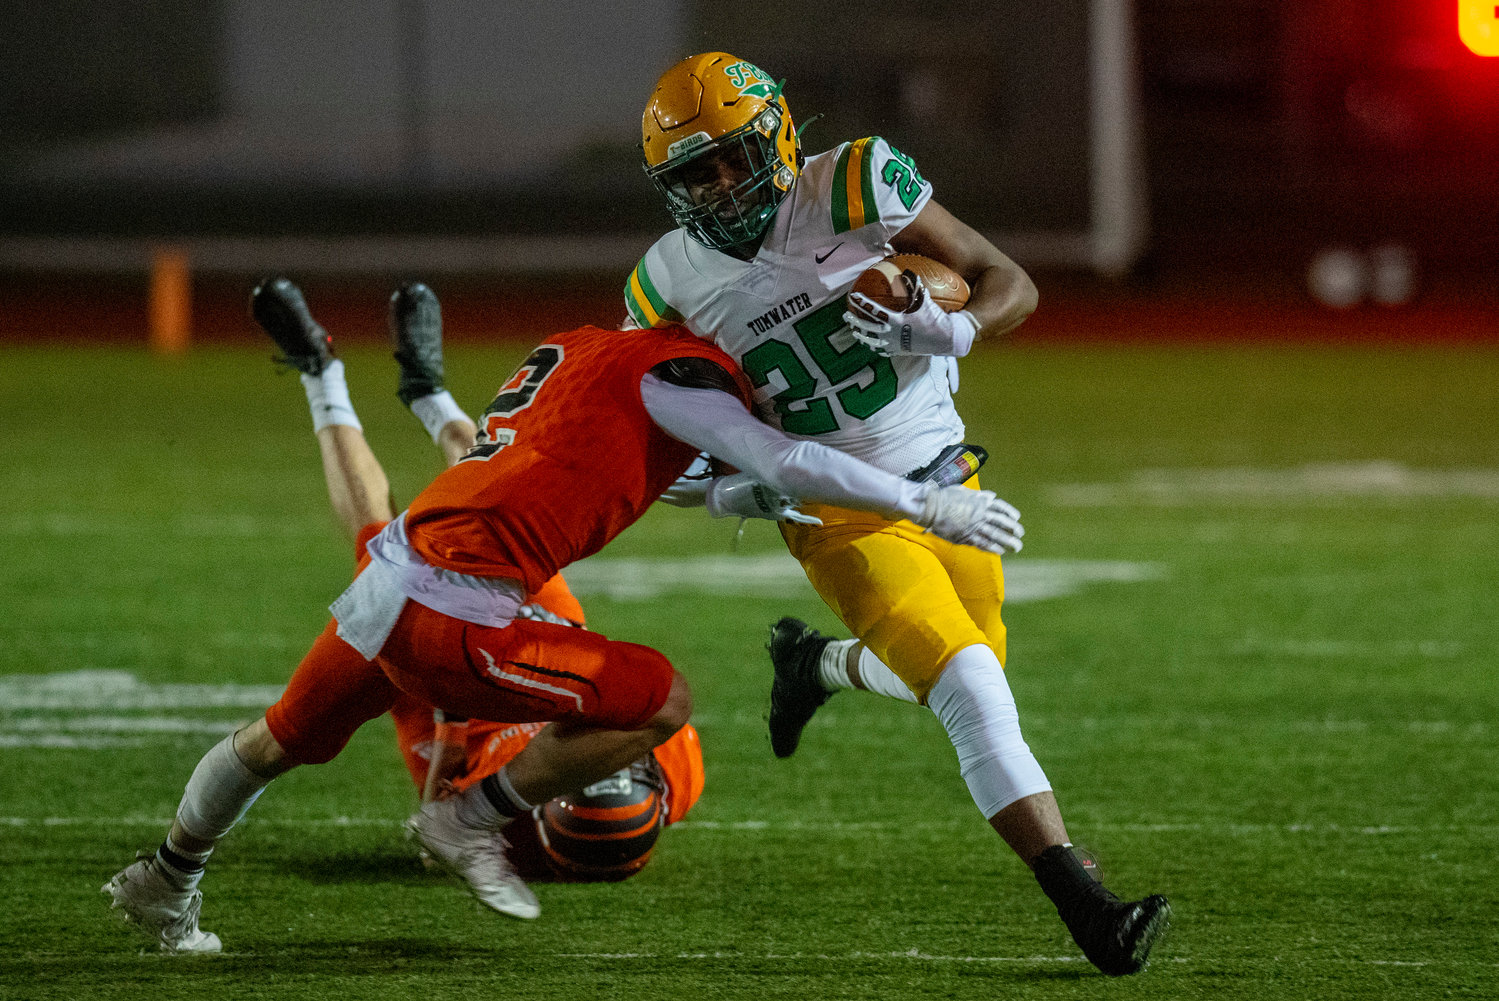 Centralia free safety Chase Sobolesky (2) wraps up Tumwater running back Carlos Matheney (25) during a game at Tiger Stadium Oct. 29.